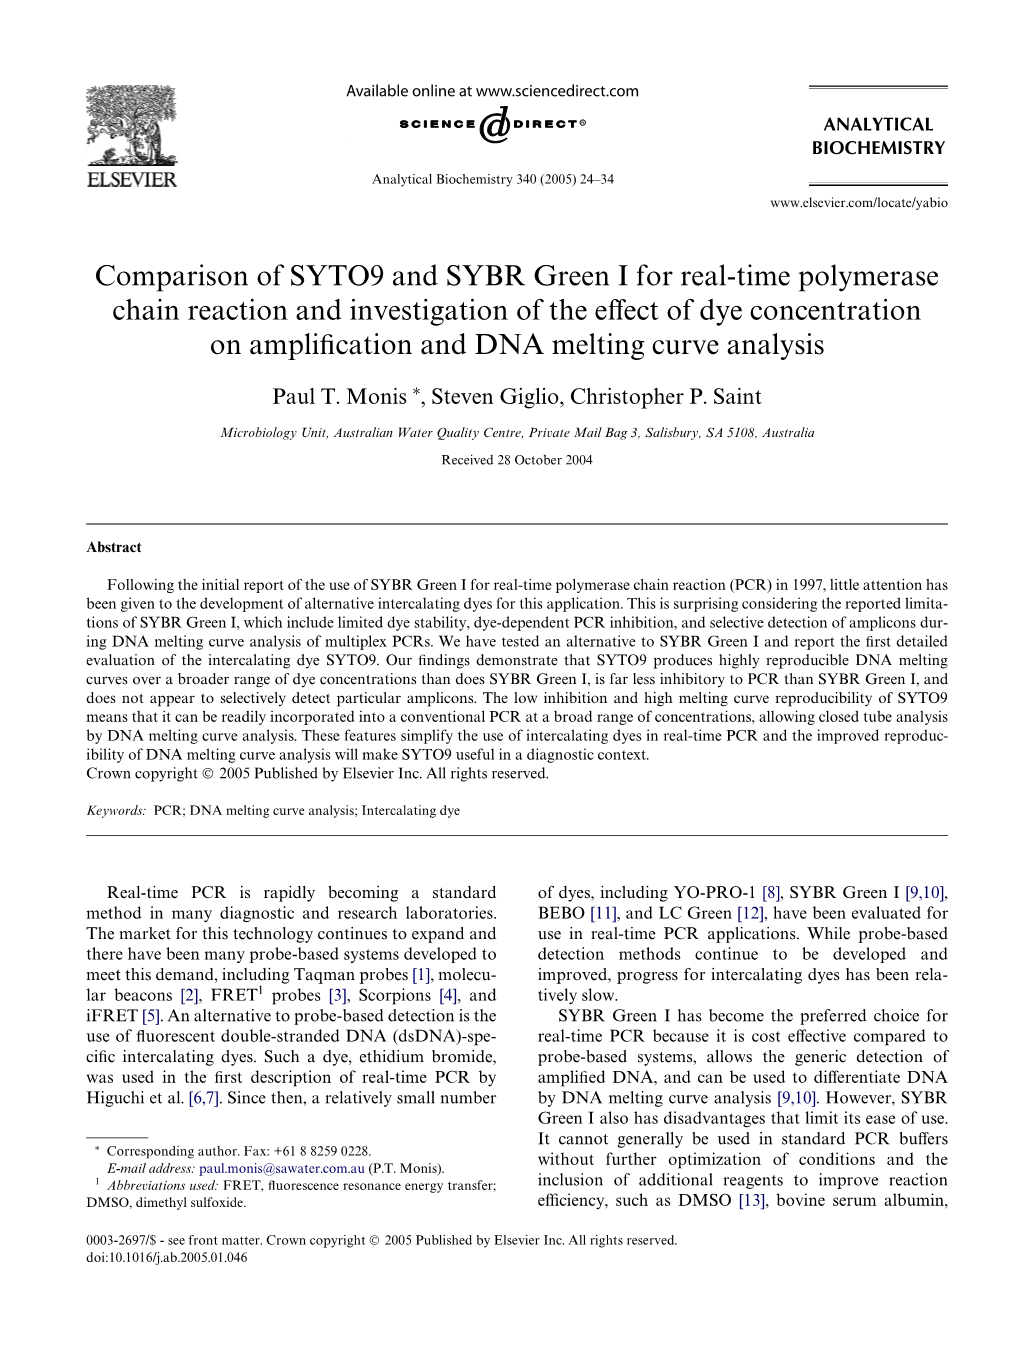 Comparison of SYTO9 and SYBR Green I for Real-Time Polymerase